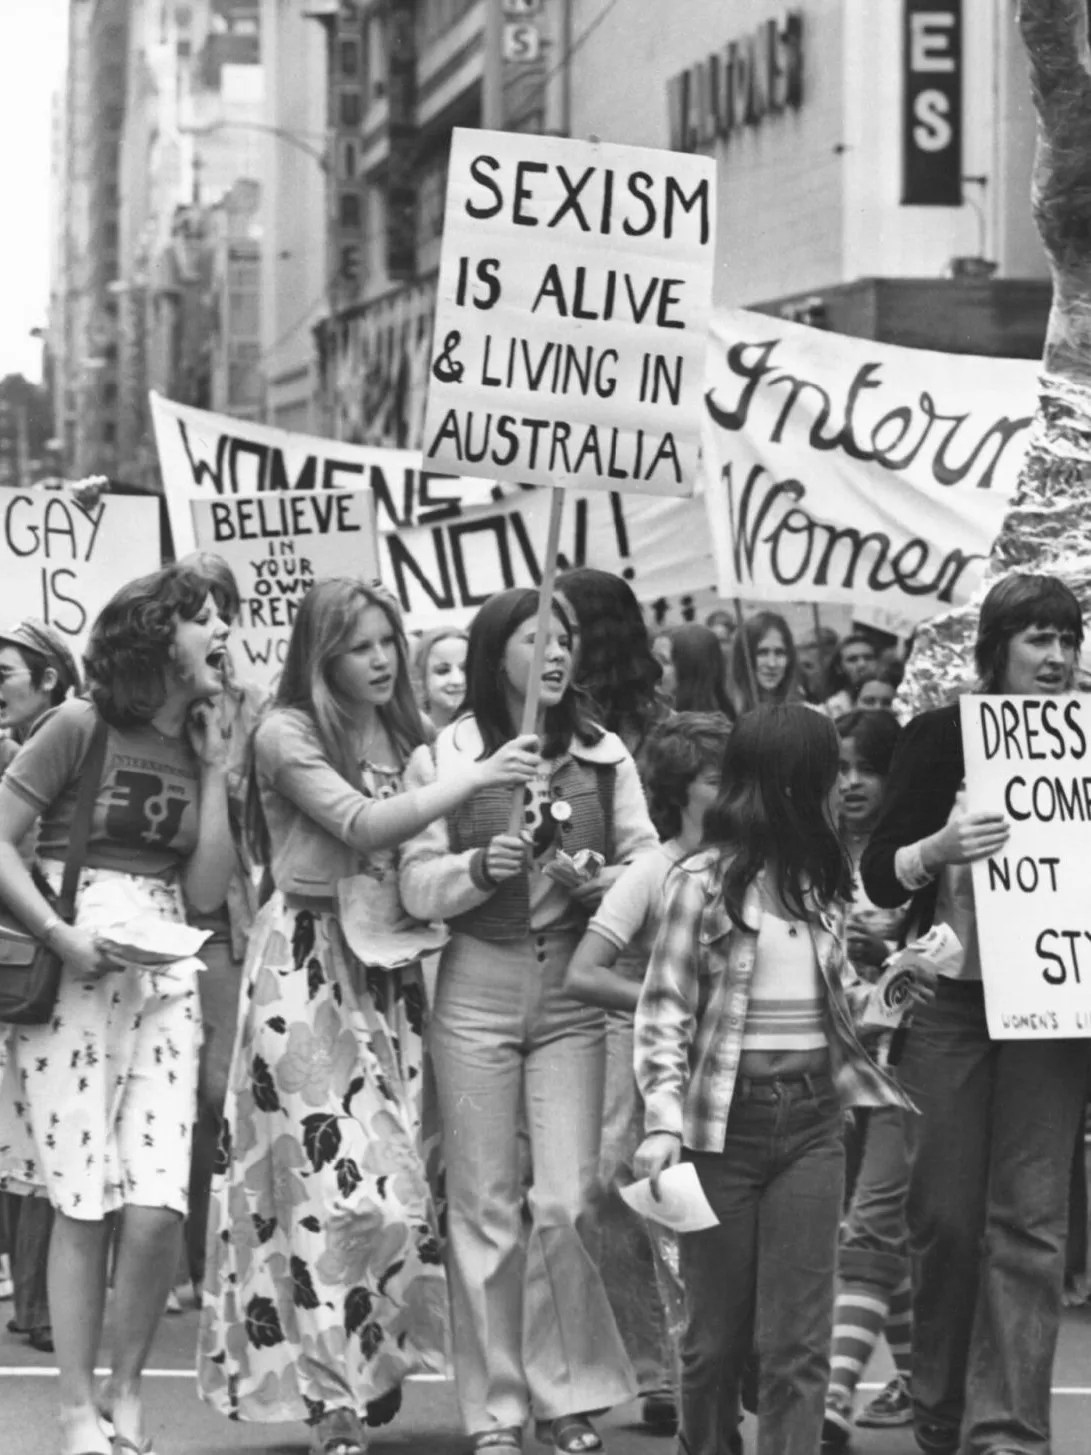 A black and white photo of a group of women holding protest signs in 1975. Signs say 'sexism is alive and well in Australia' and 'dress for comfort not style'.